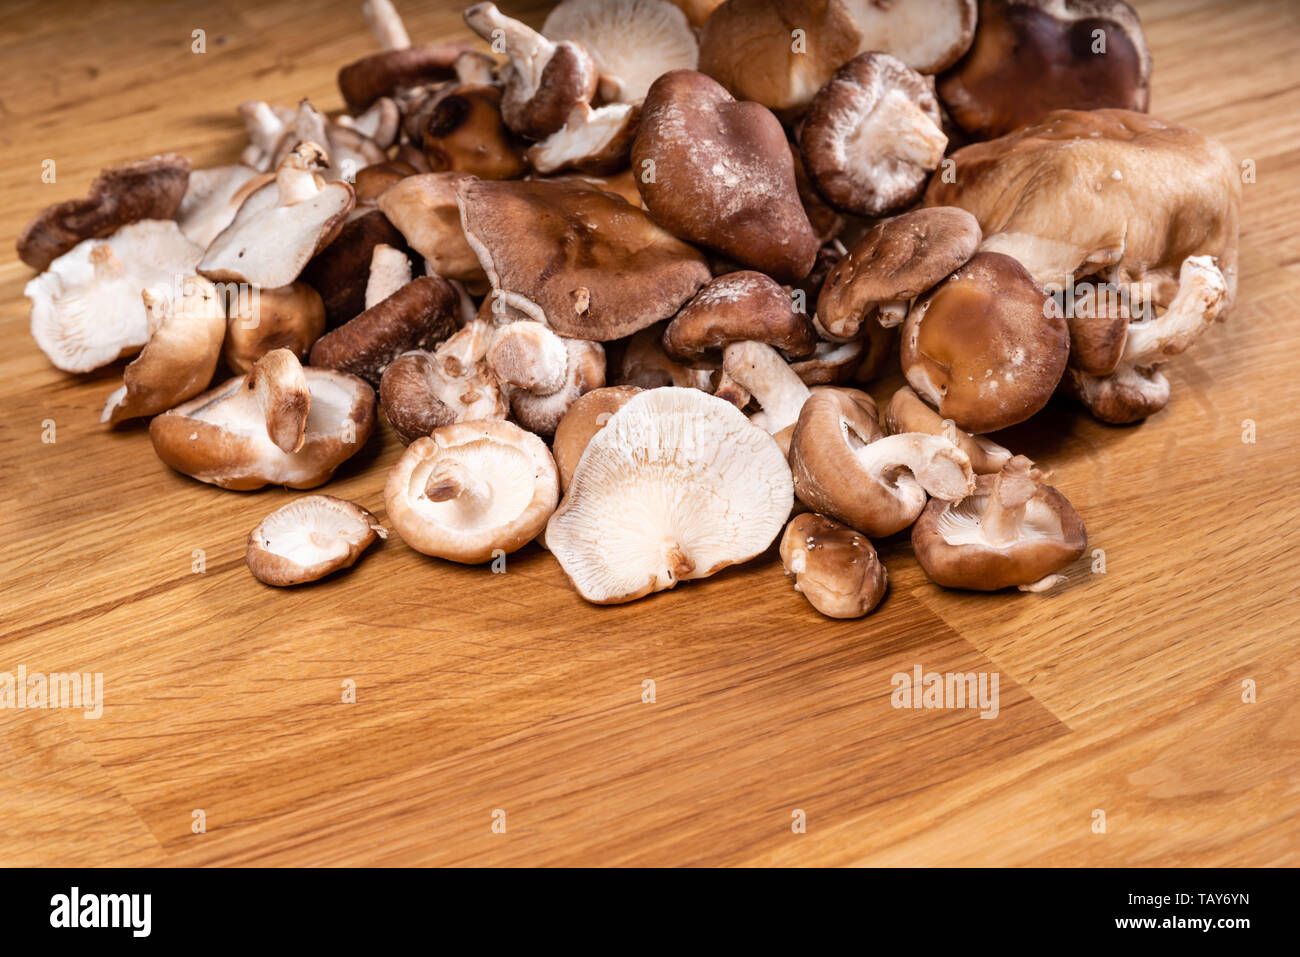 Fresh Cremini mushrooms ready for preparation on a table Stock Photo